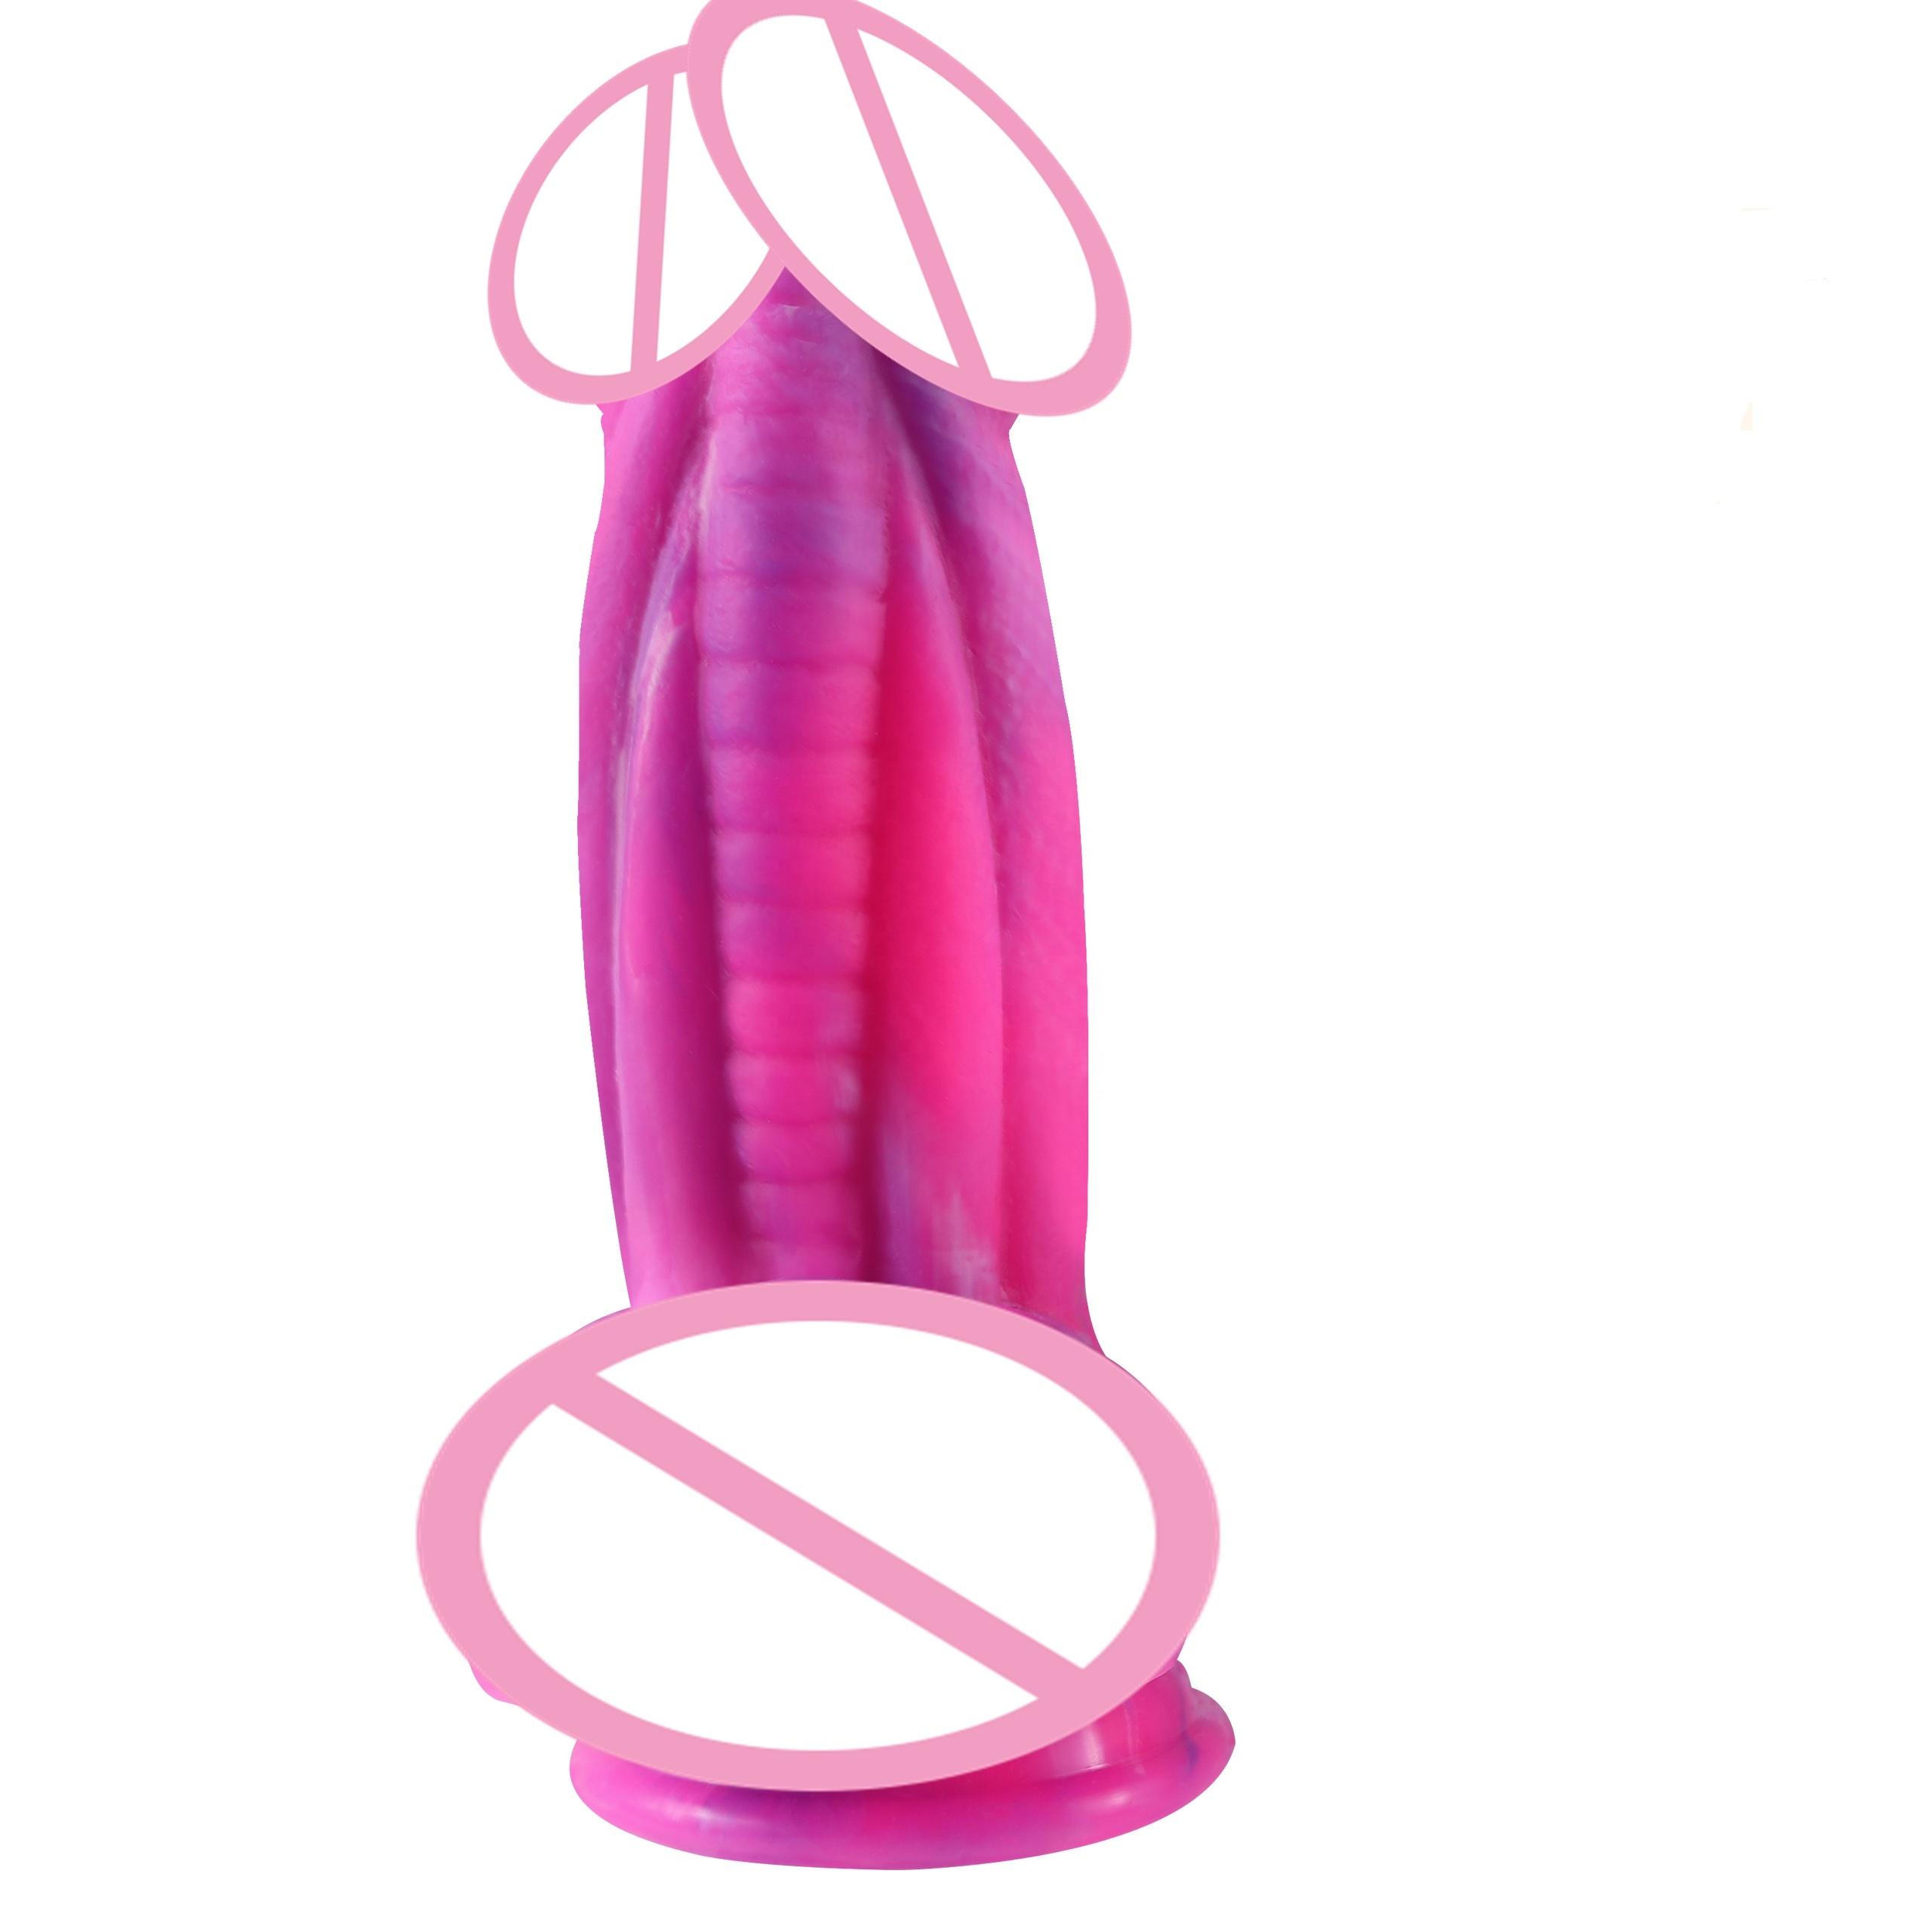  High Quality Male Muscle Monster Penis Sex Toy Dildo For Women Gay And Couple Play Waterproof